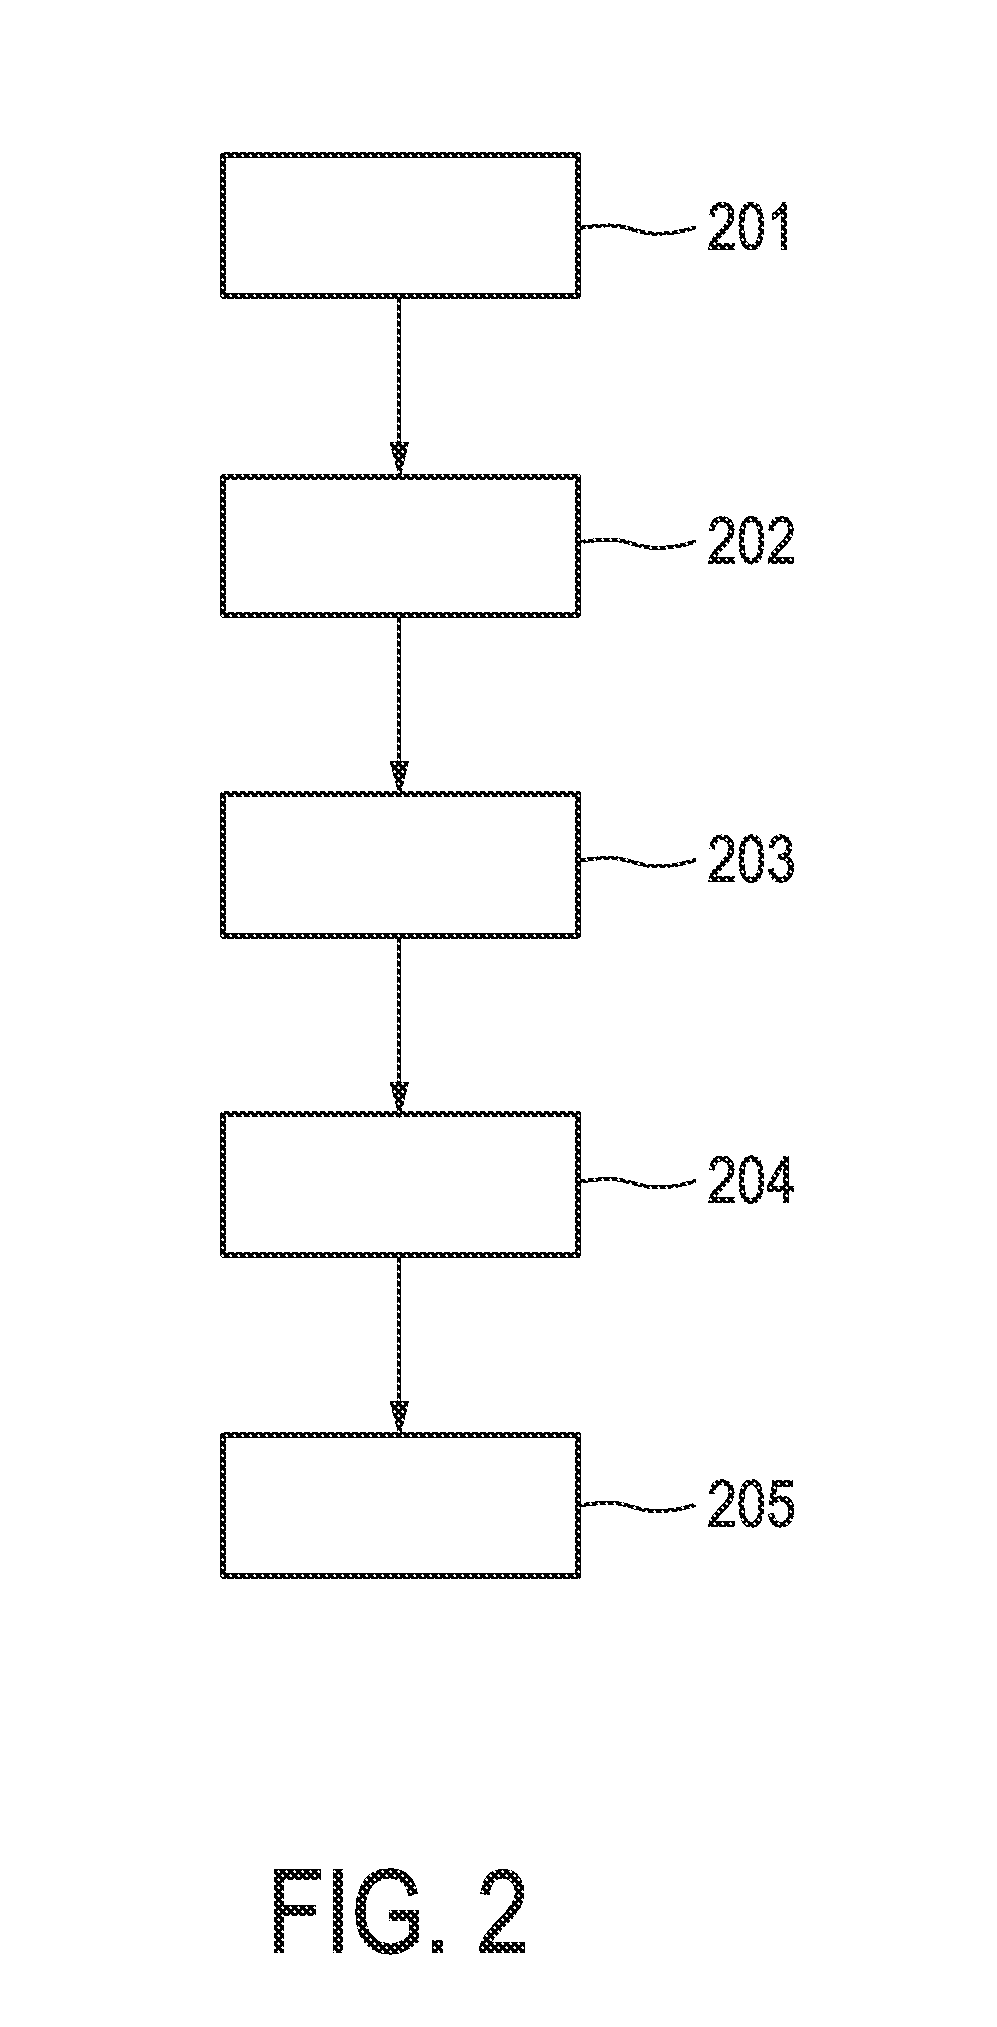 Imaging apparatus for imaging a heart